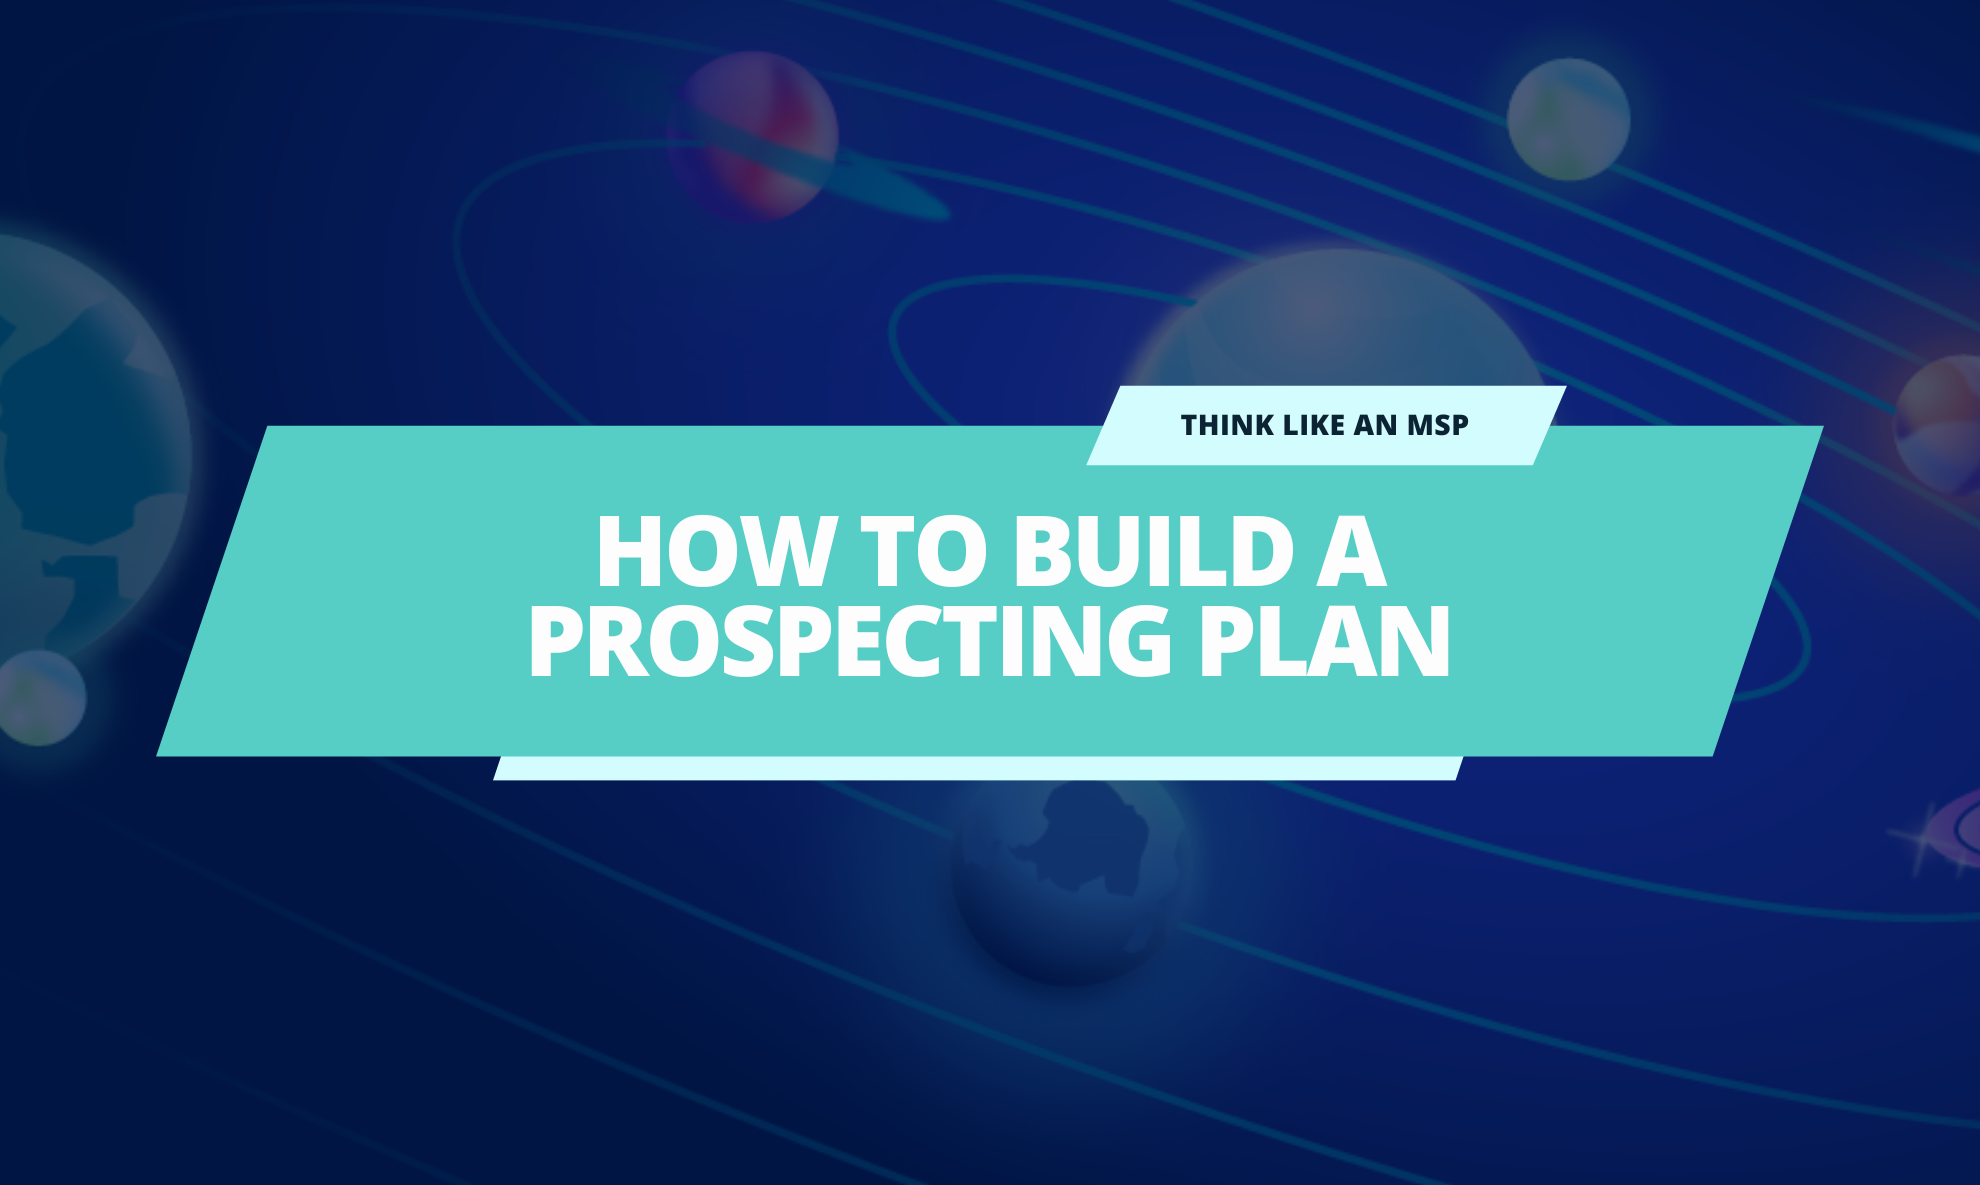 8 Steps to Build a Prospecting Plan for Your MSP Business